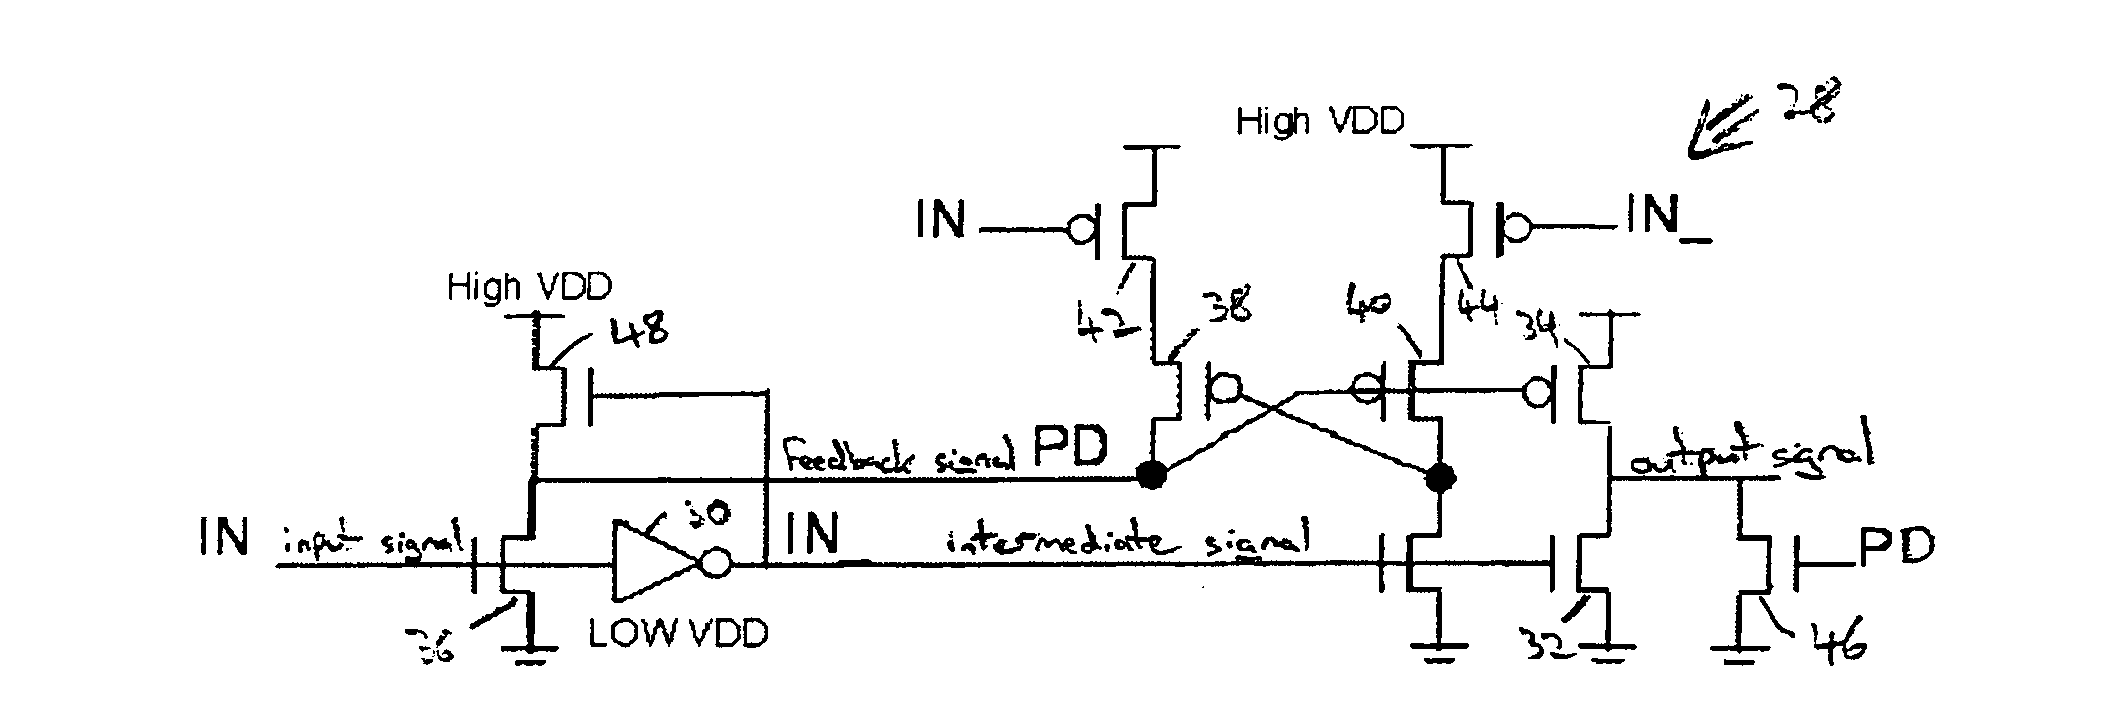 Level shifter for use between voltage domains